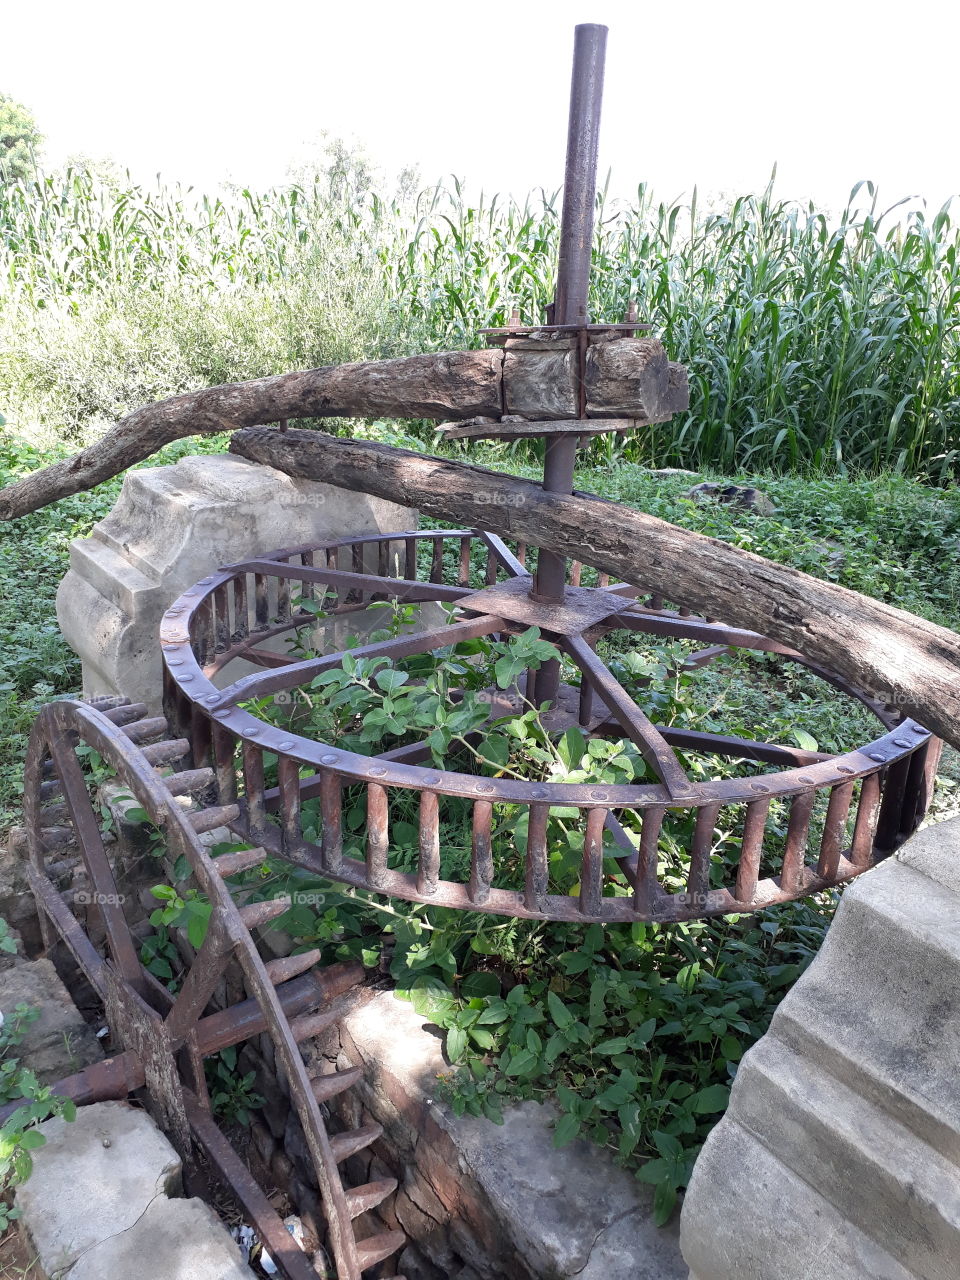 gears of old well